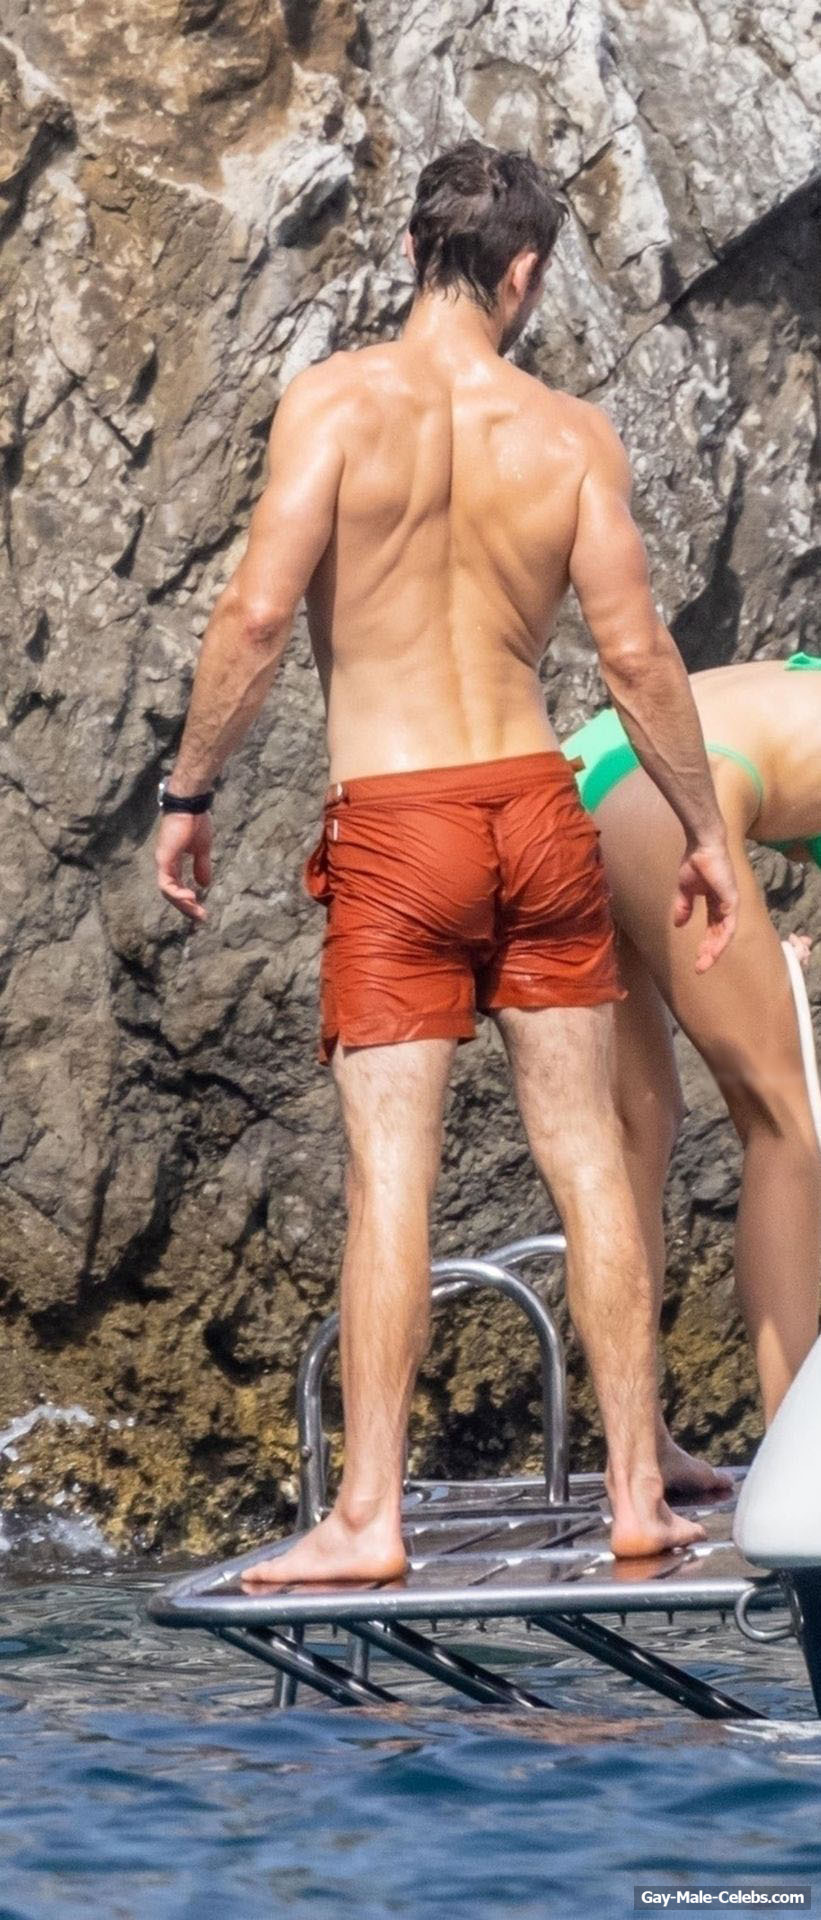 Chace crawford butt